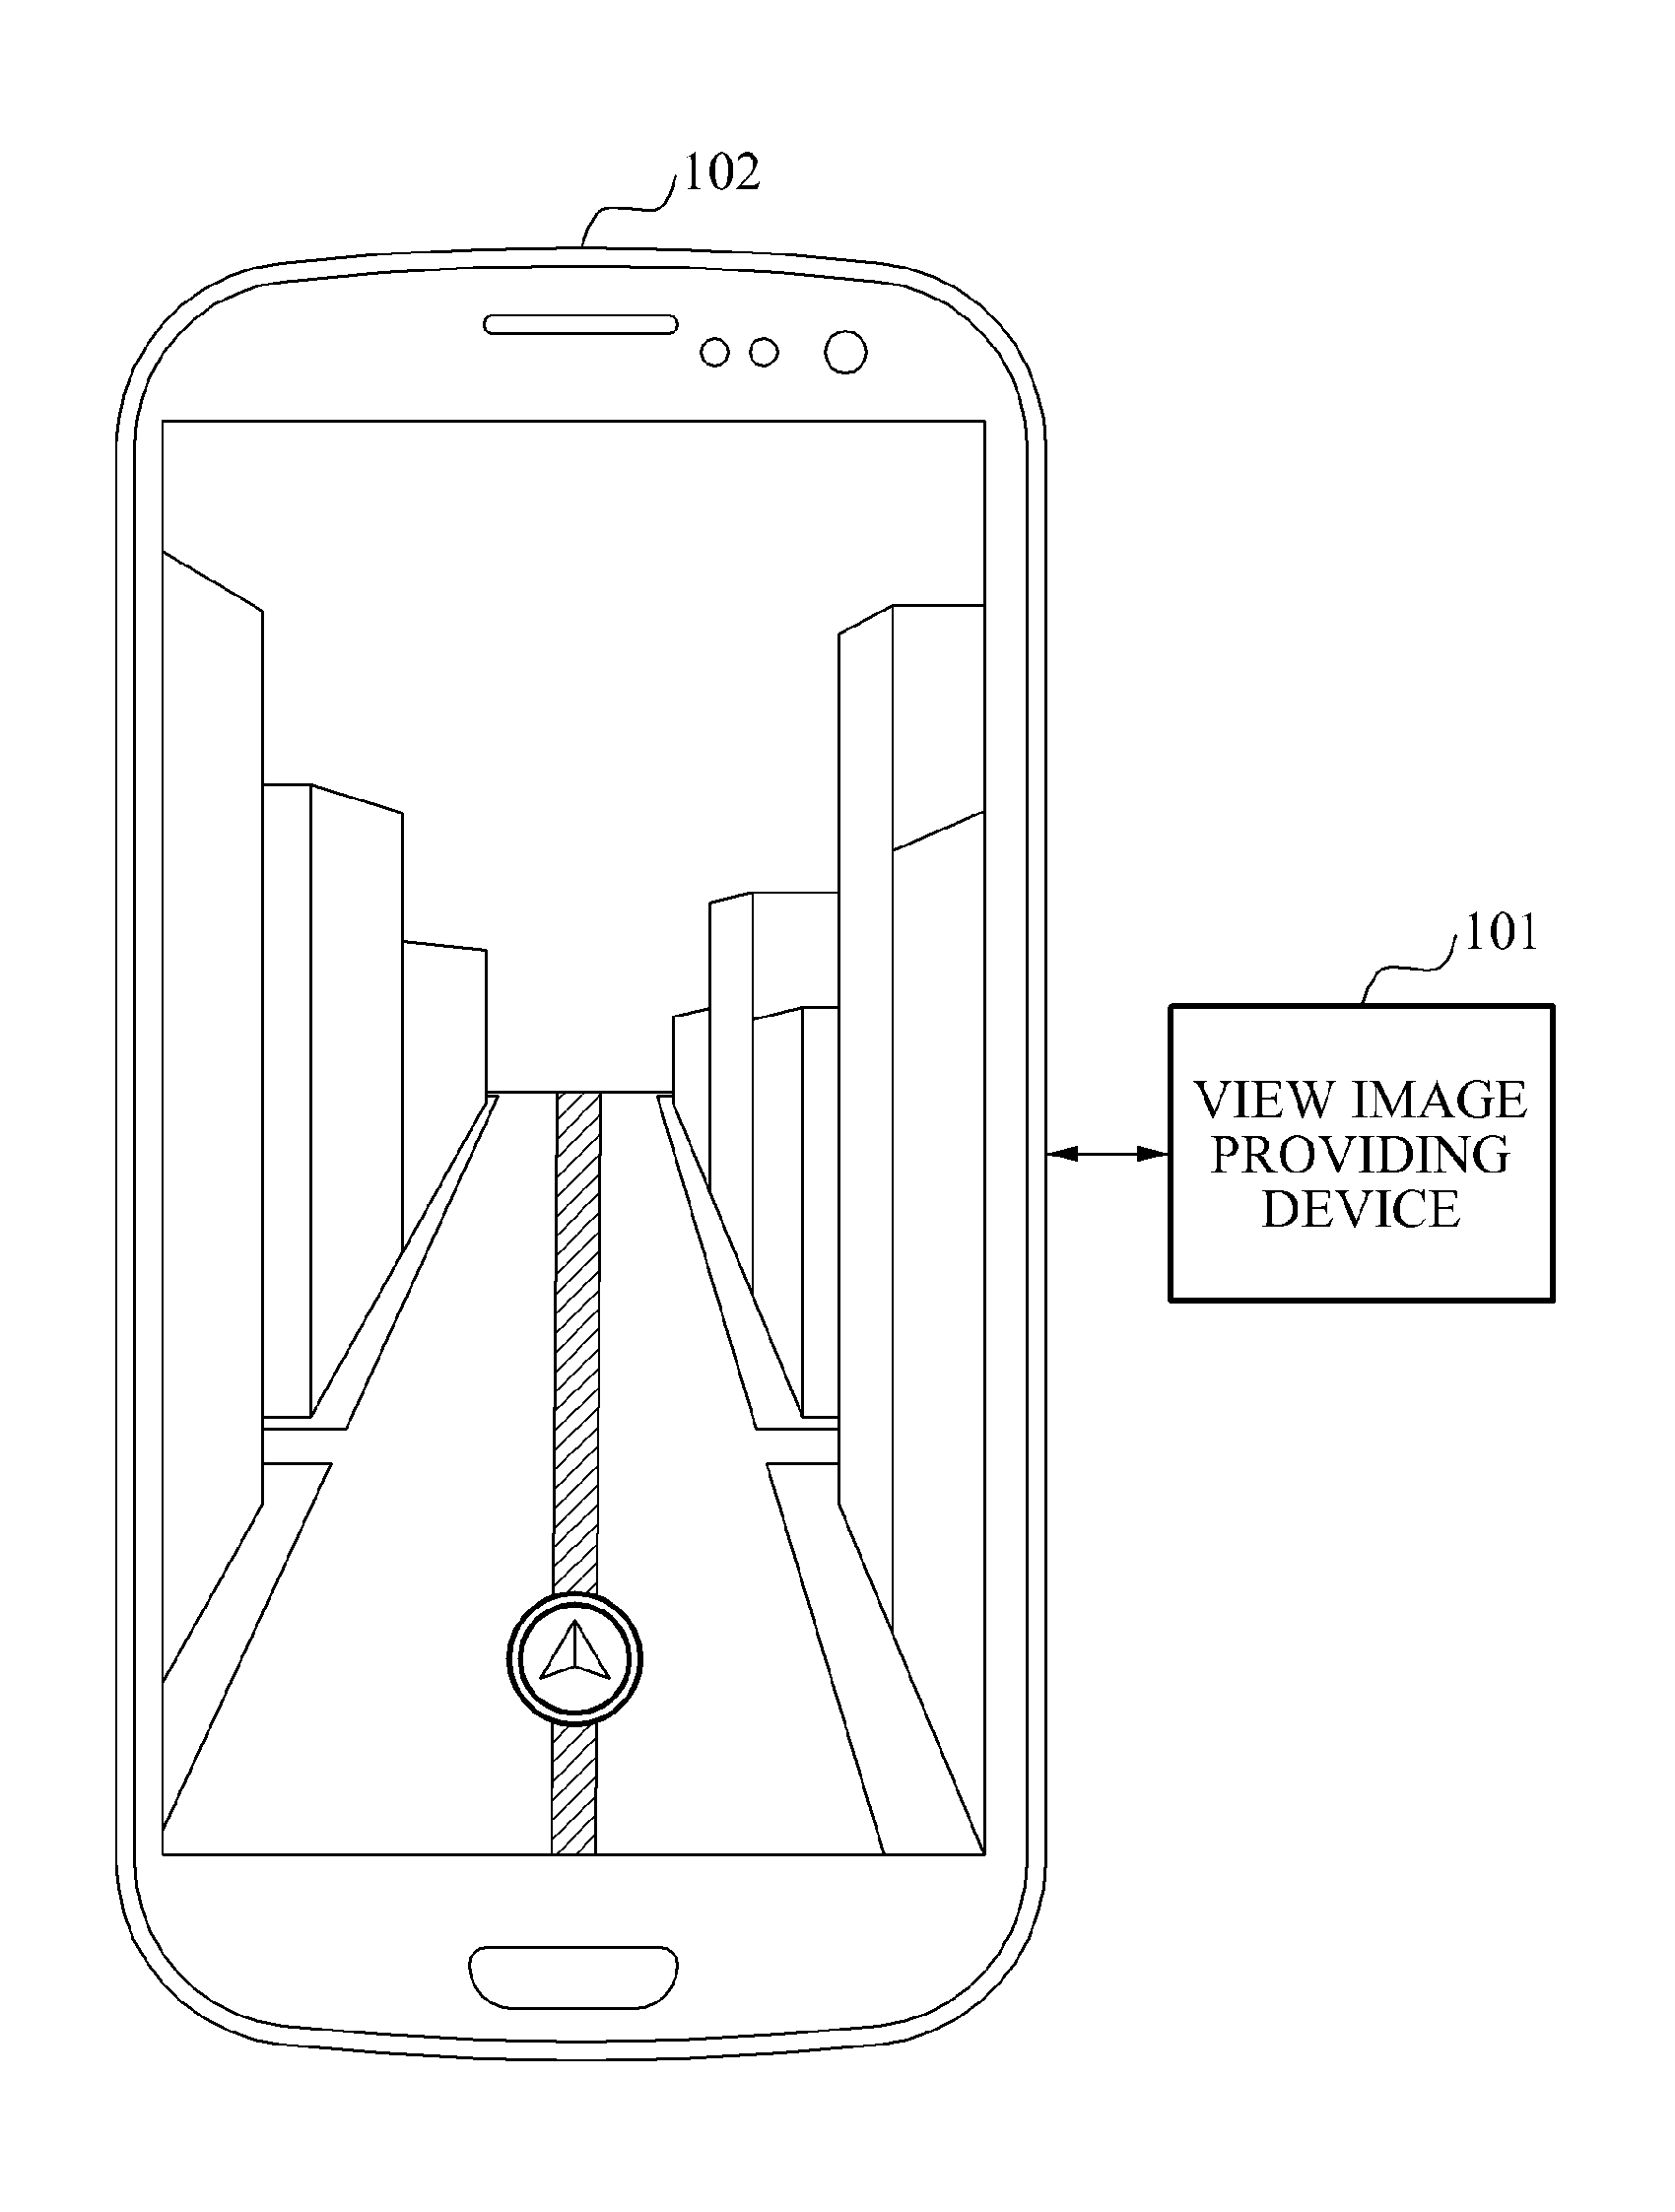 View image providing device and method using omnidirectional image and 3-dimensional data